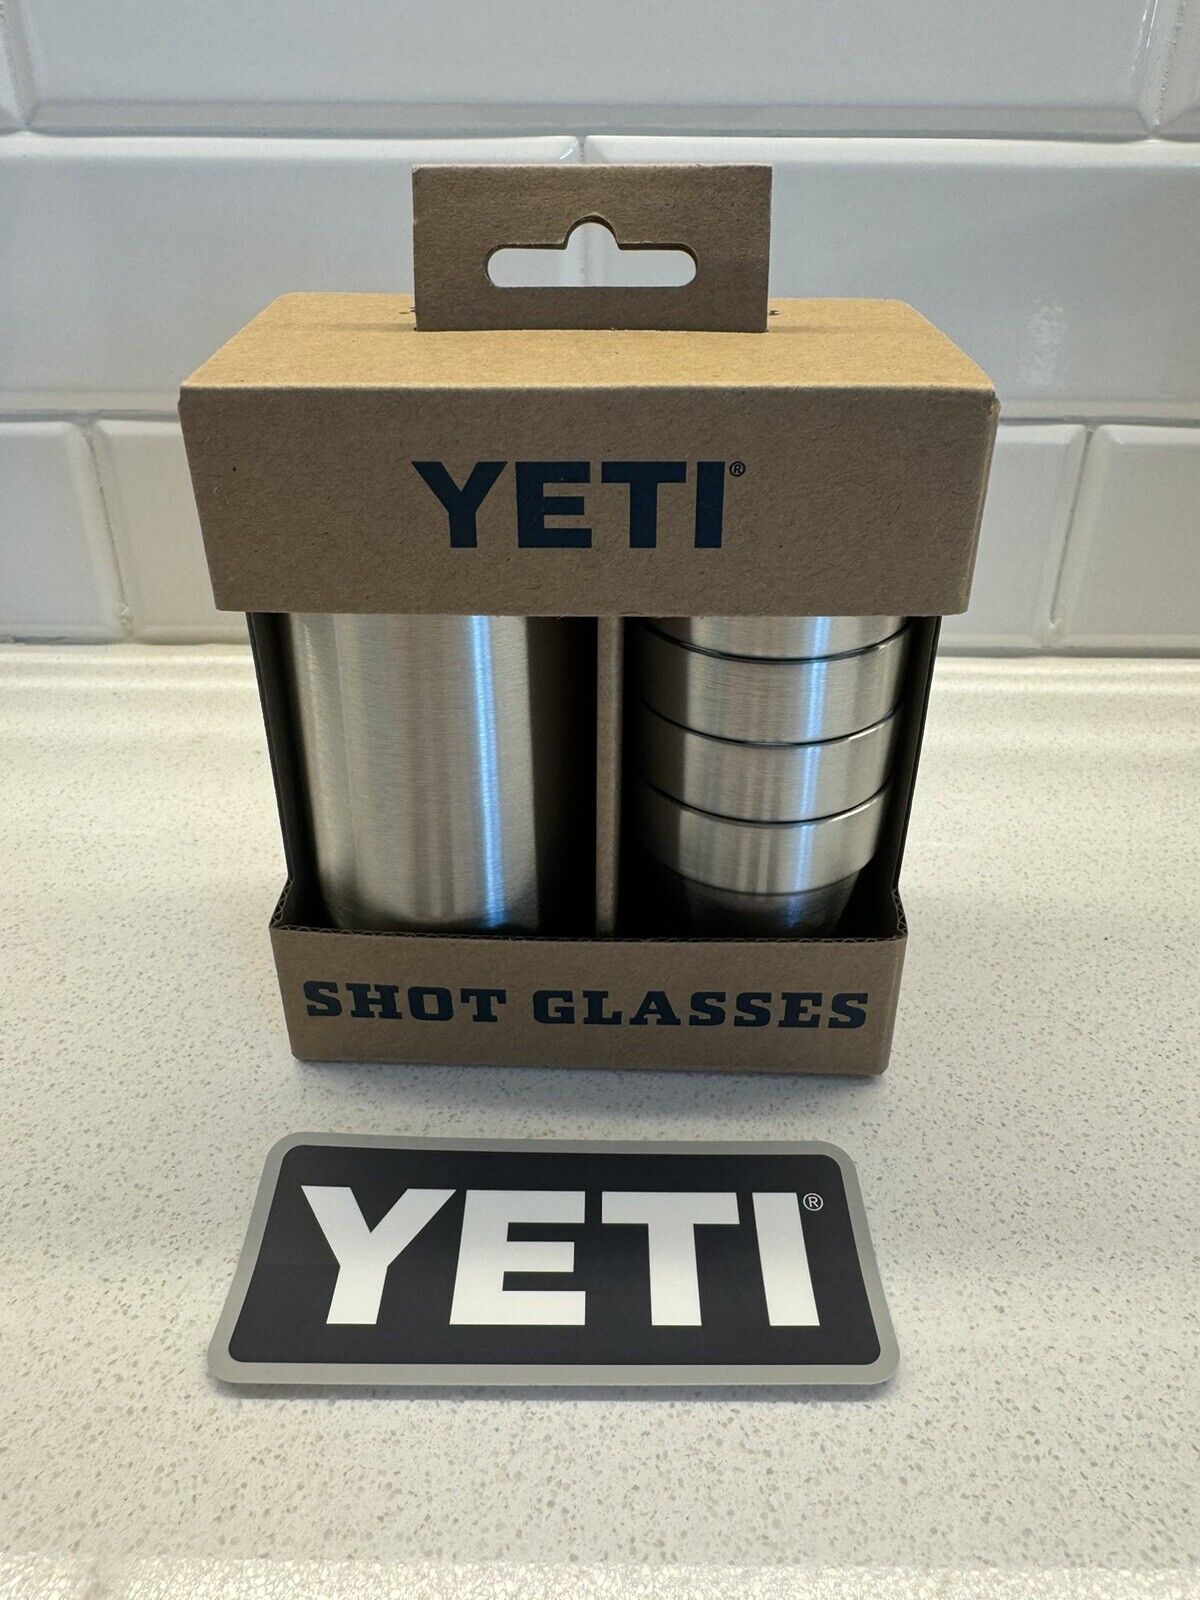 YETI Shot Glasses 🥃 - RARE & SOLD OUT - Limited Release - Stainless Steel - NEW